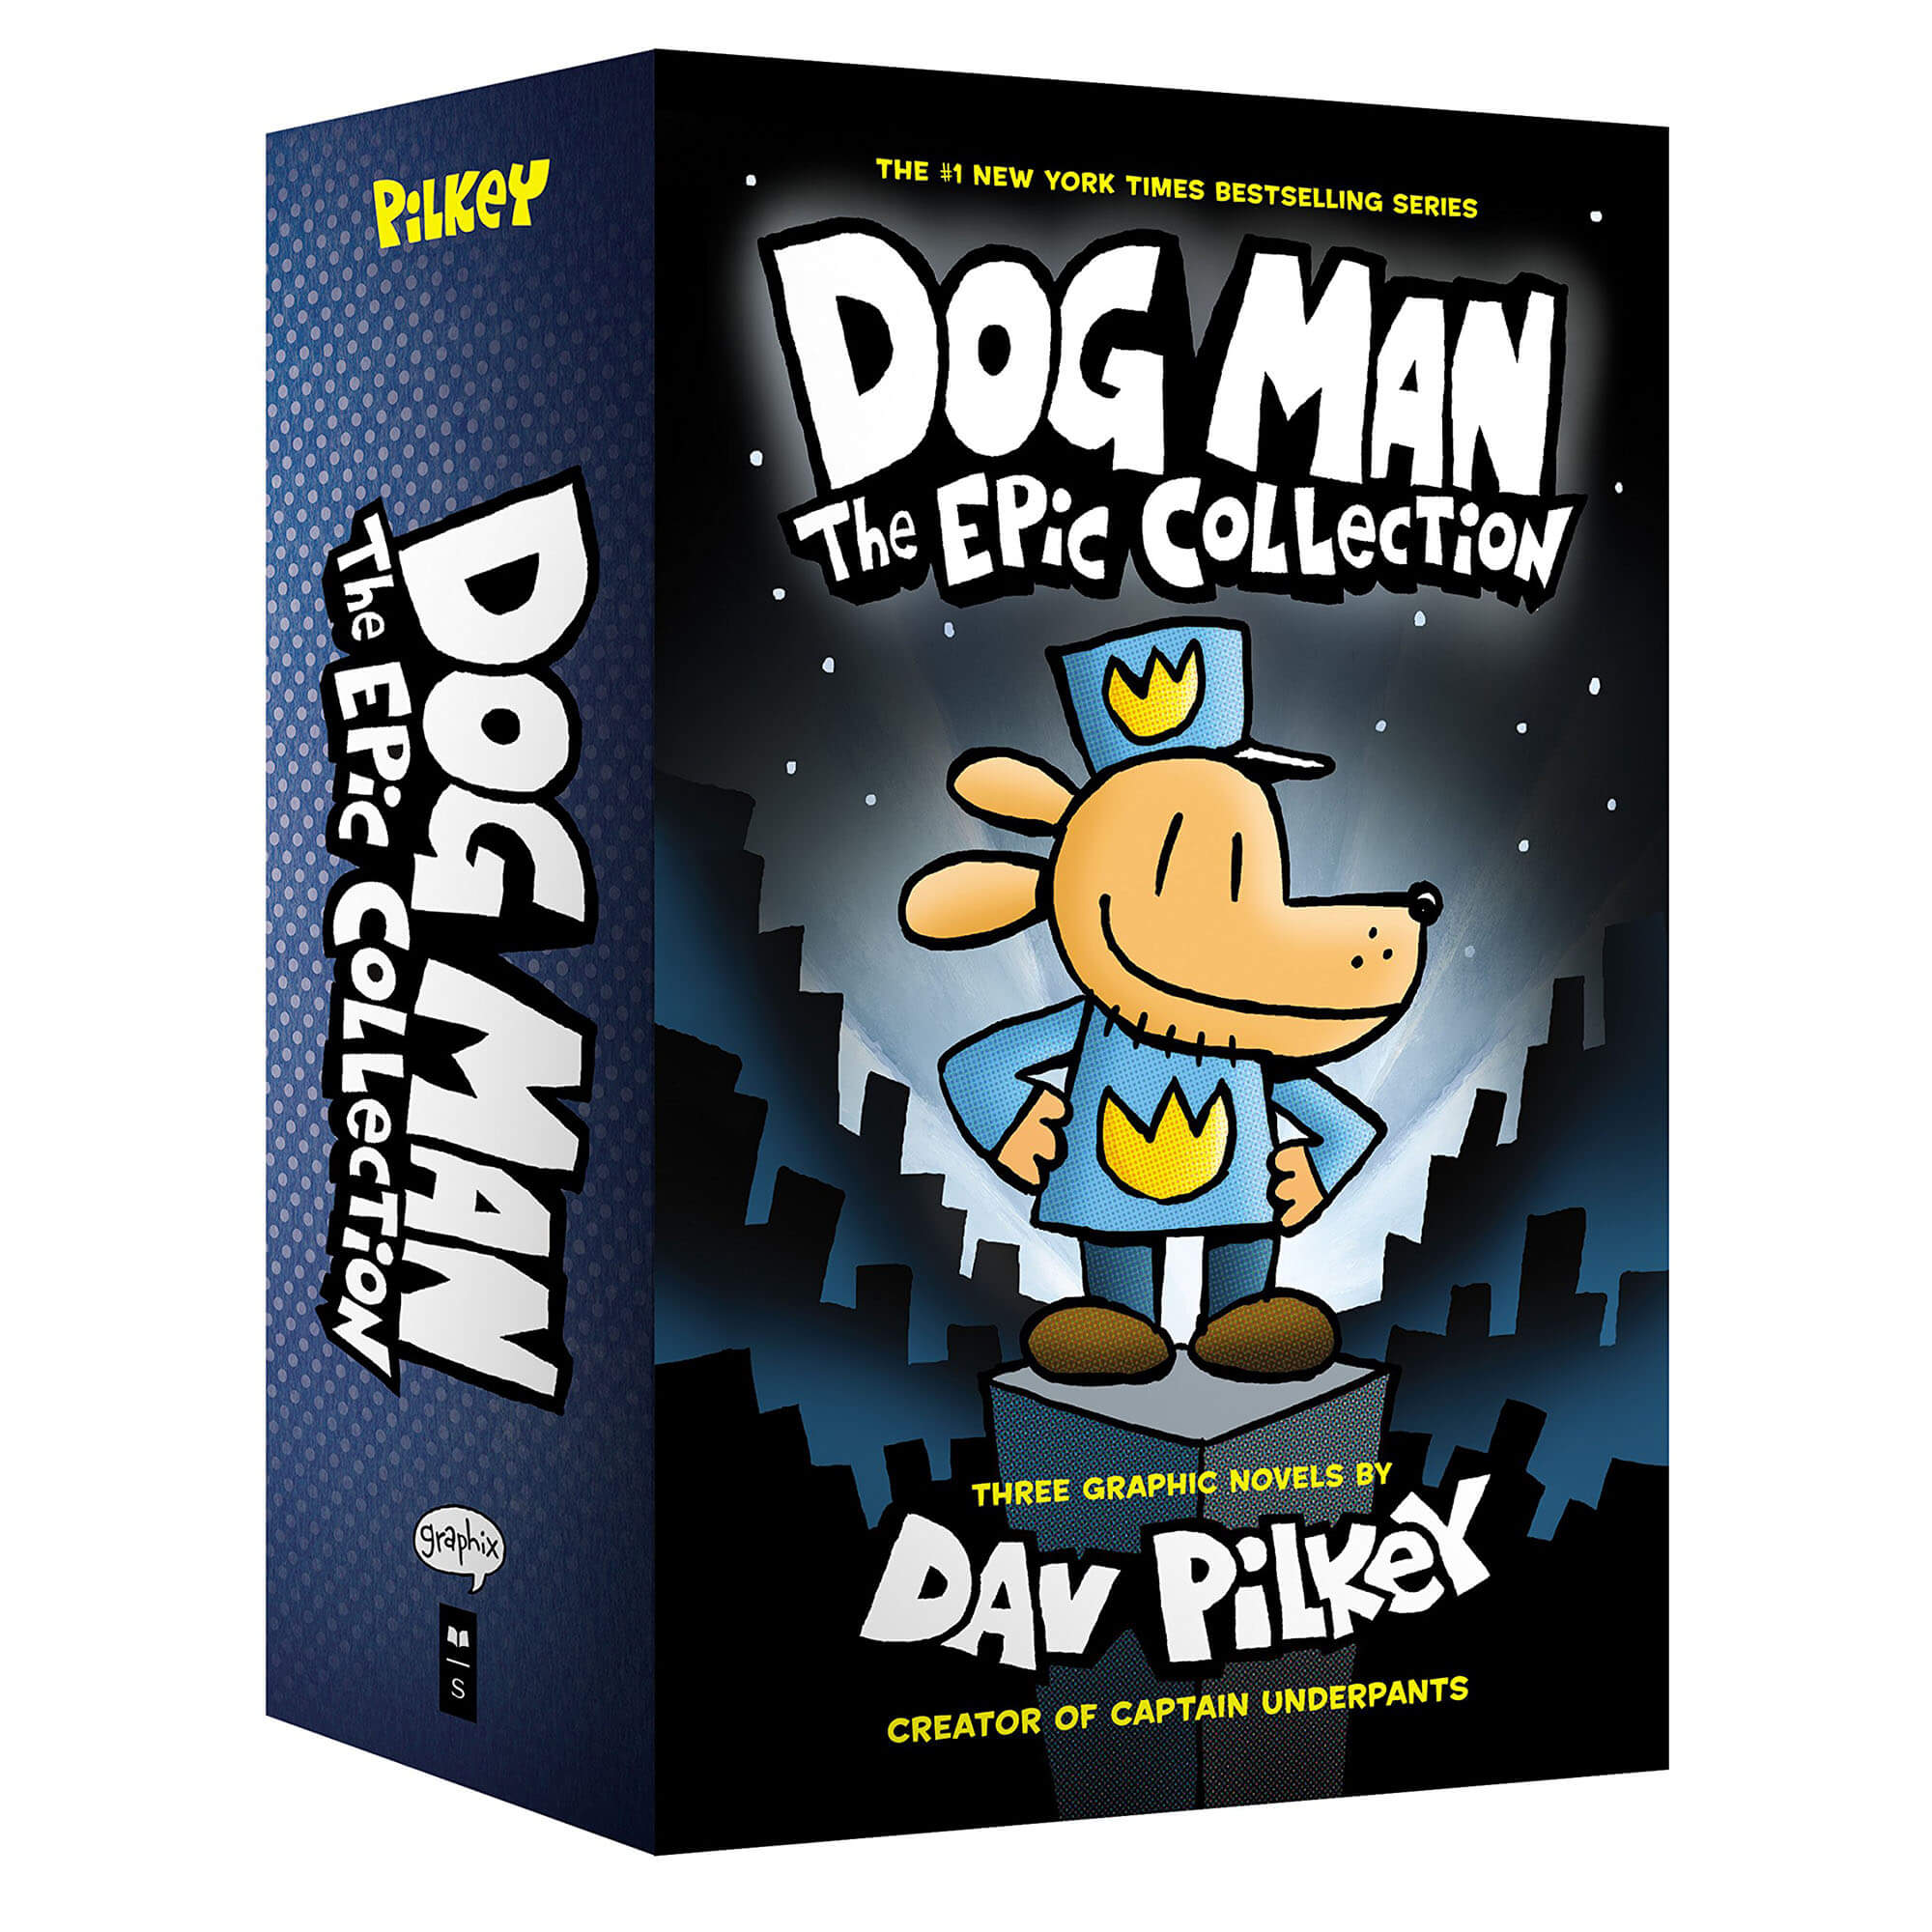 Dog Man: The Epic Collection (Dog Man #1-3 Boxed Set)